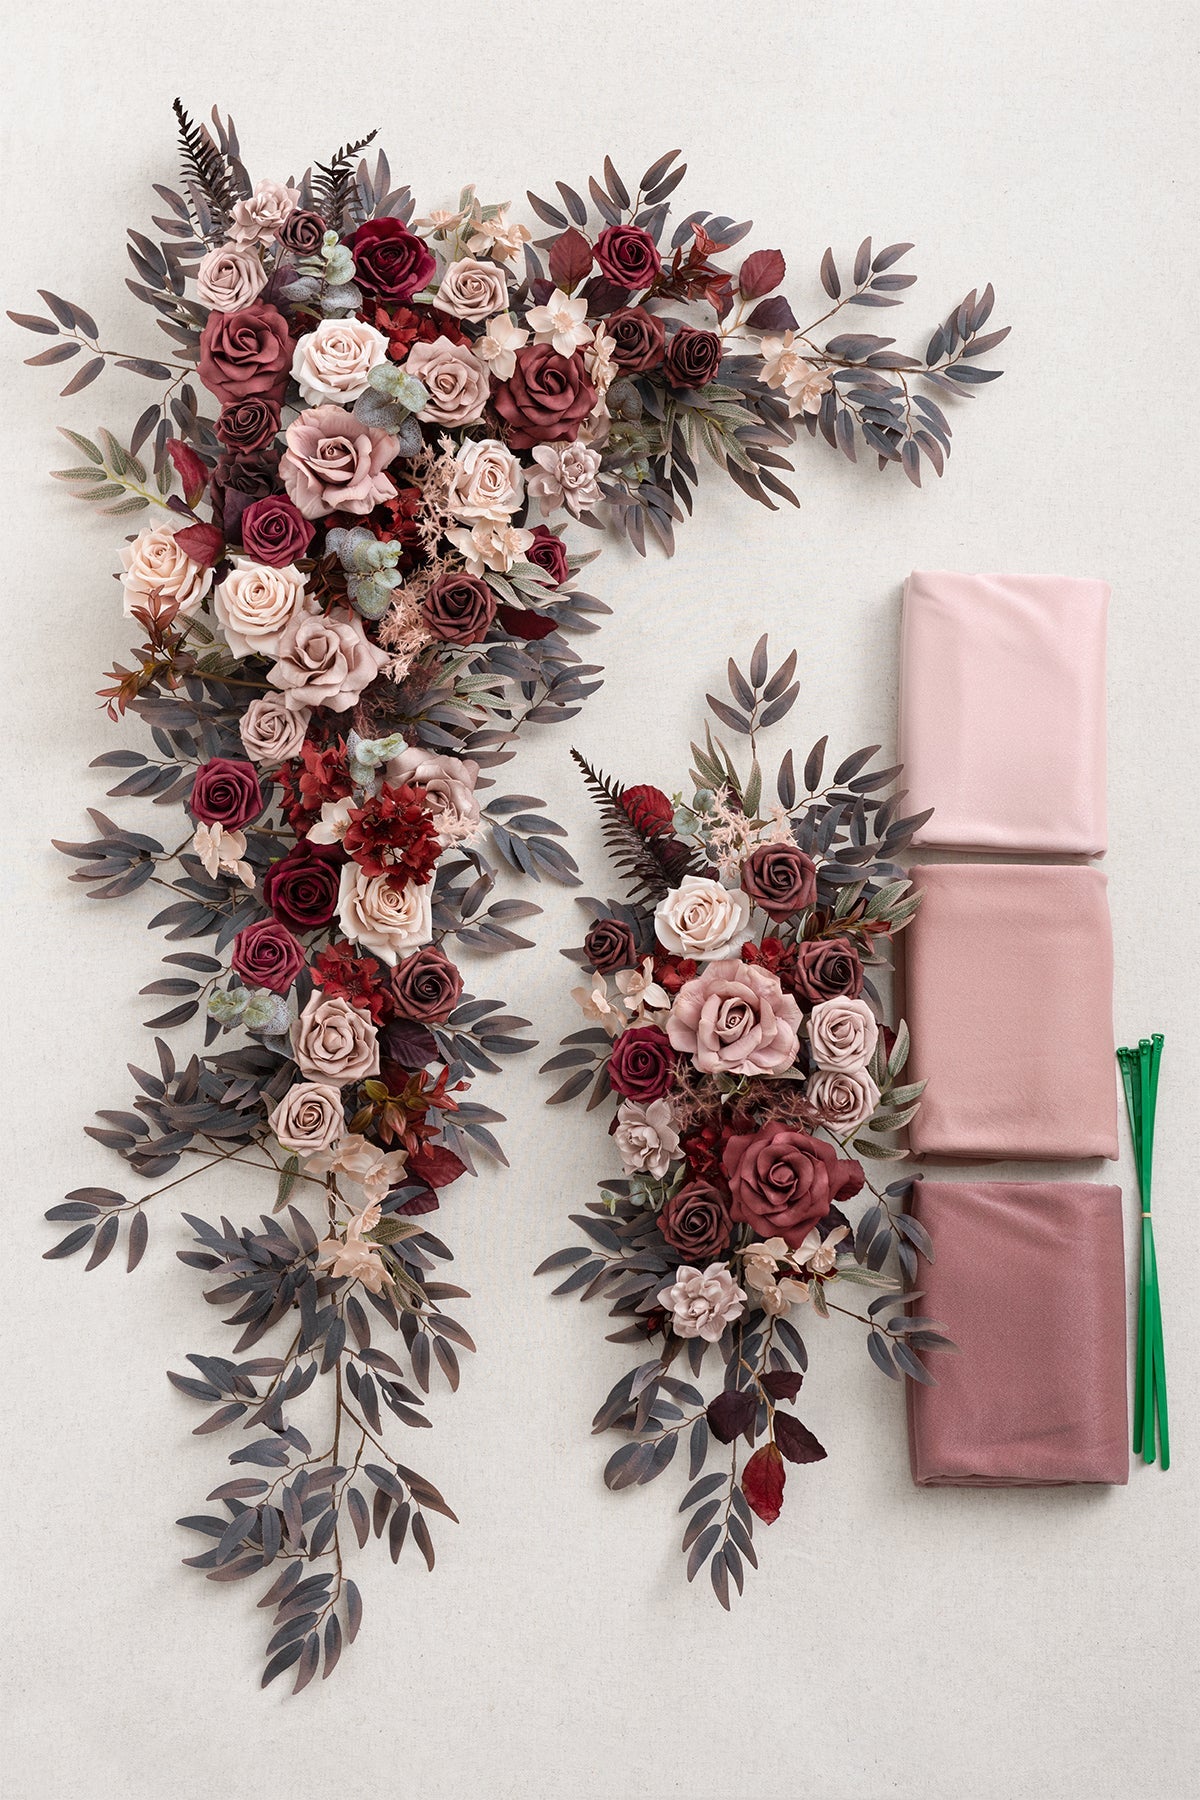 Flash Sale | Flower Arch Decor with Drapes in Burgundy & Dusty Rose